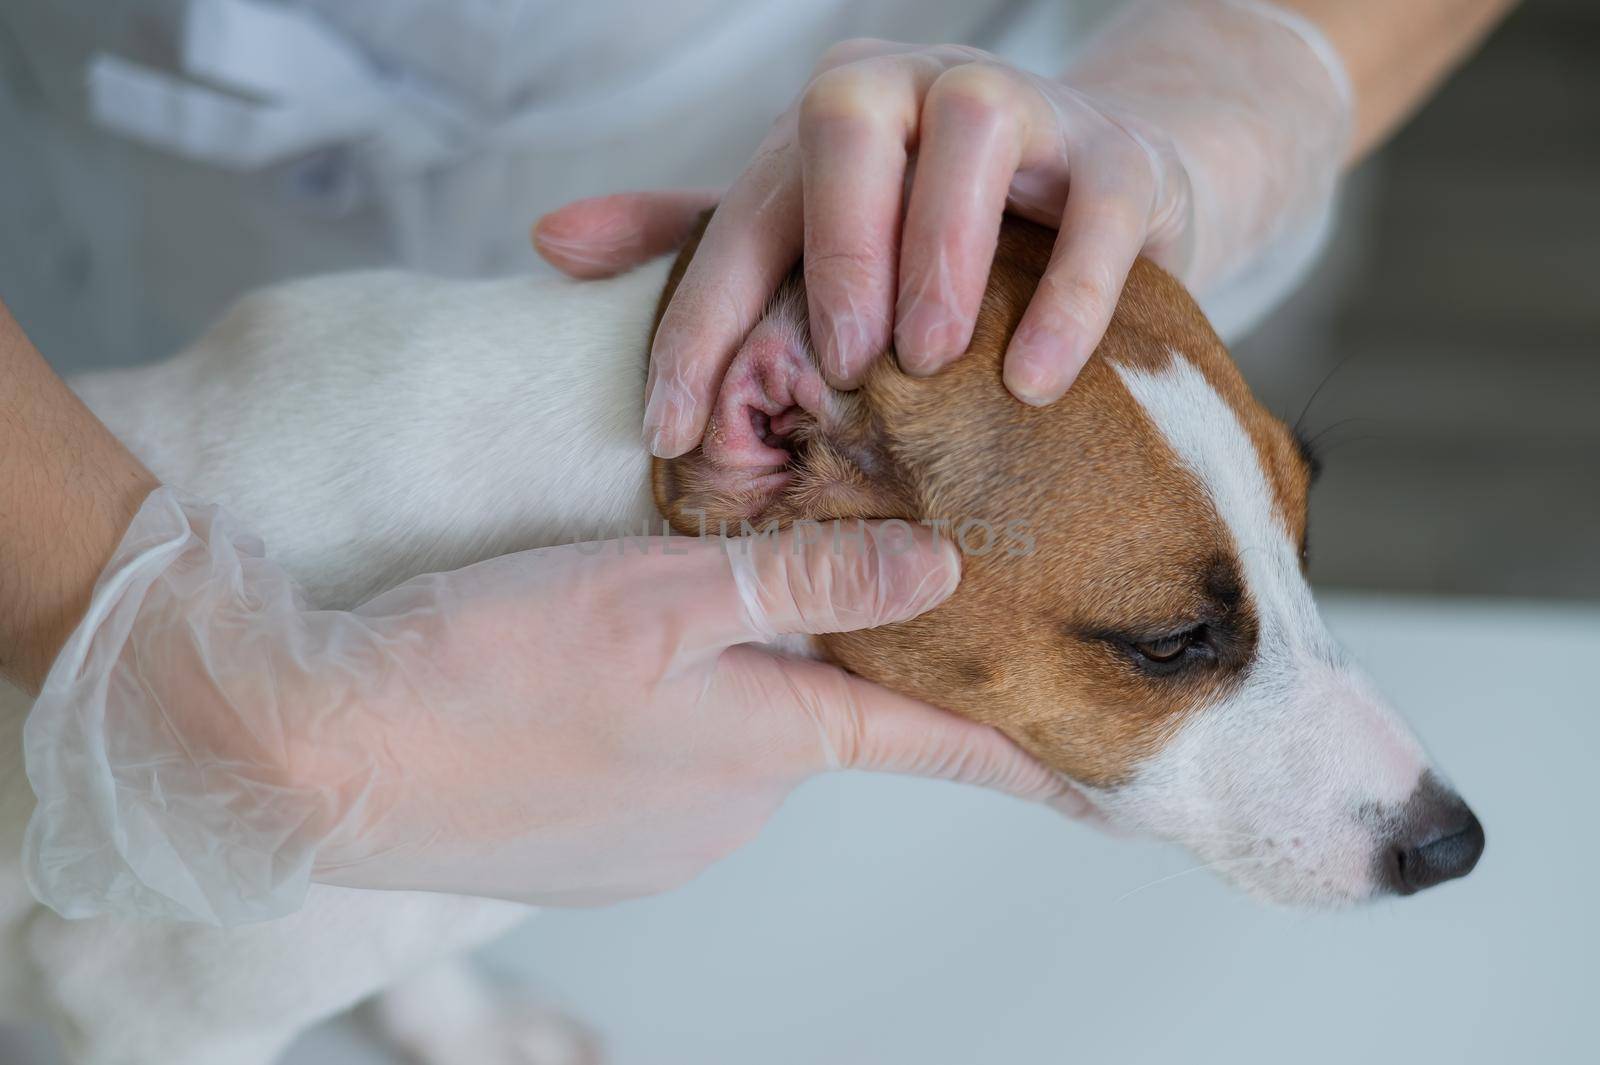 The veterinarian examines the dog's ears. Jack Russell Terrier Ear Allergy. by mrwed54